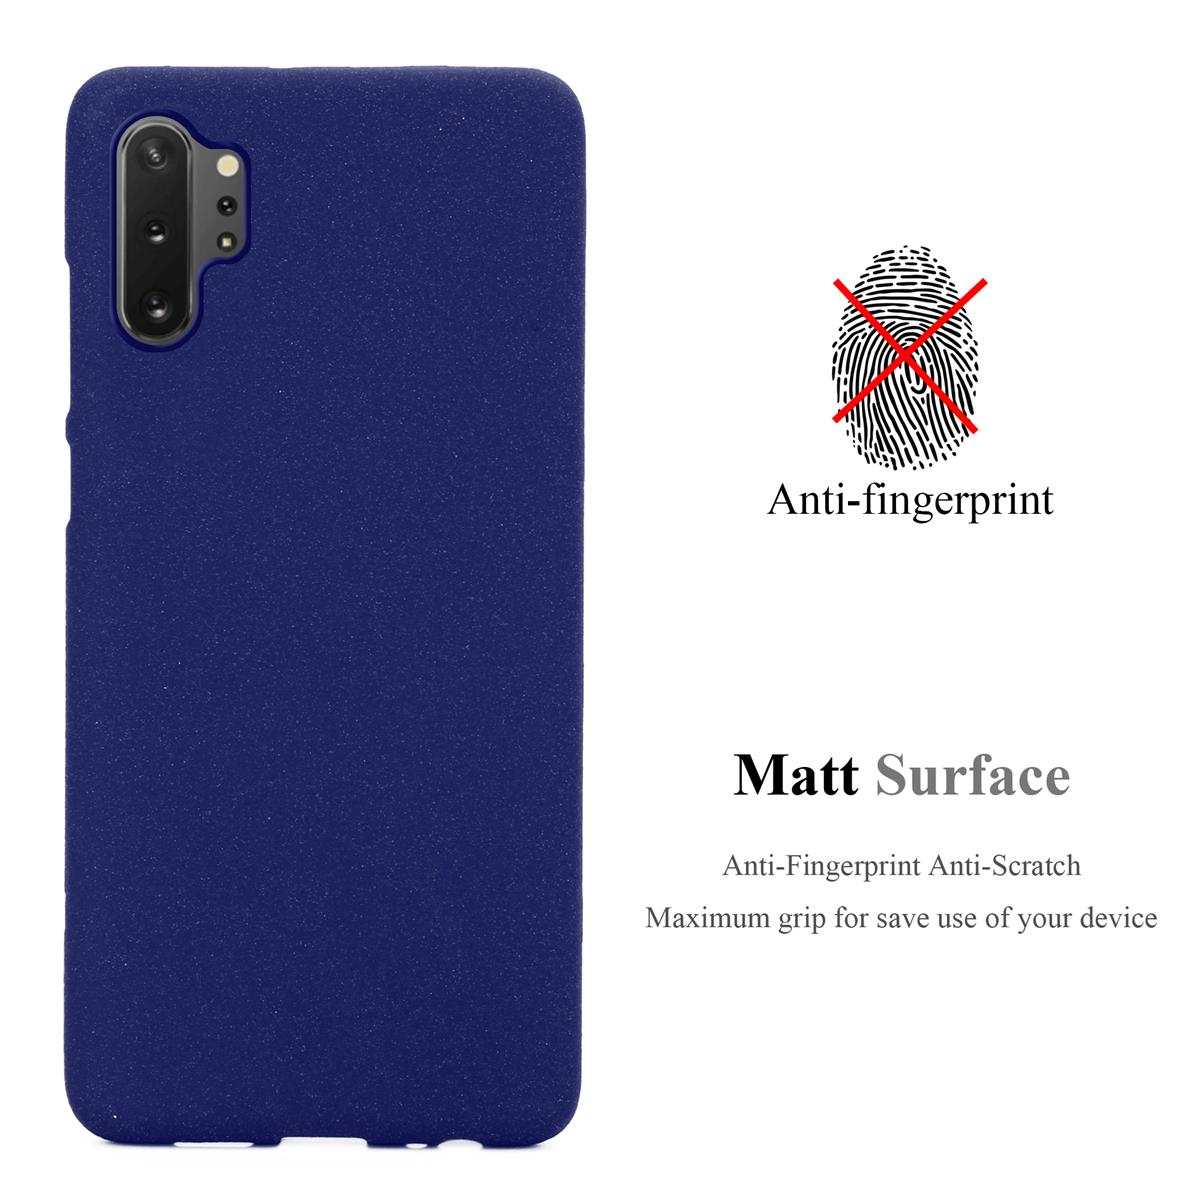 CADORABO TPU PLUS, NOTE FROST BLAU Galaxy Frosted 10 Samsung, DUNKEL Backcover, Schutzhülle